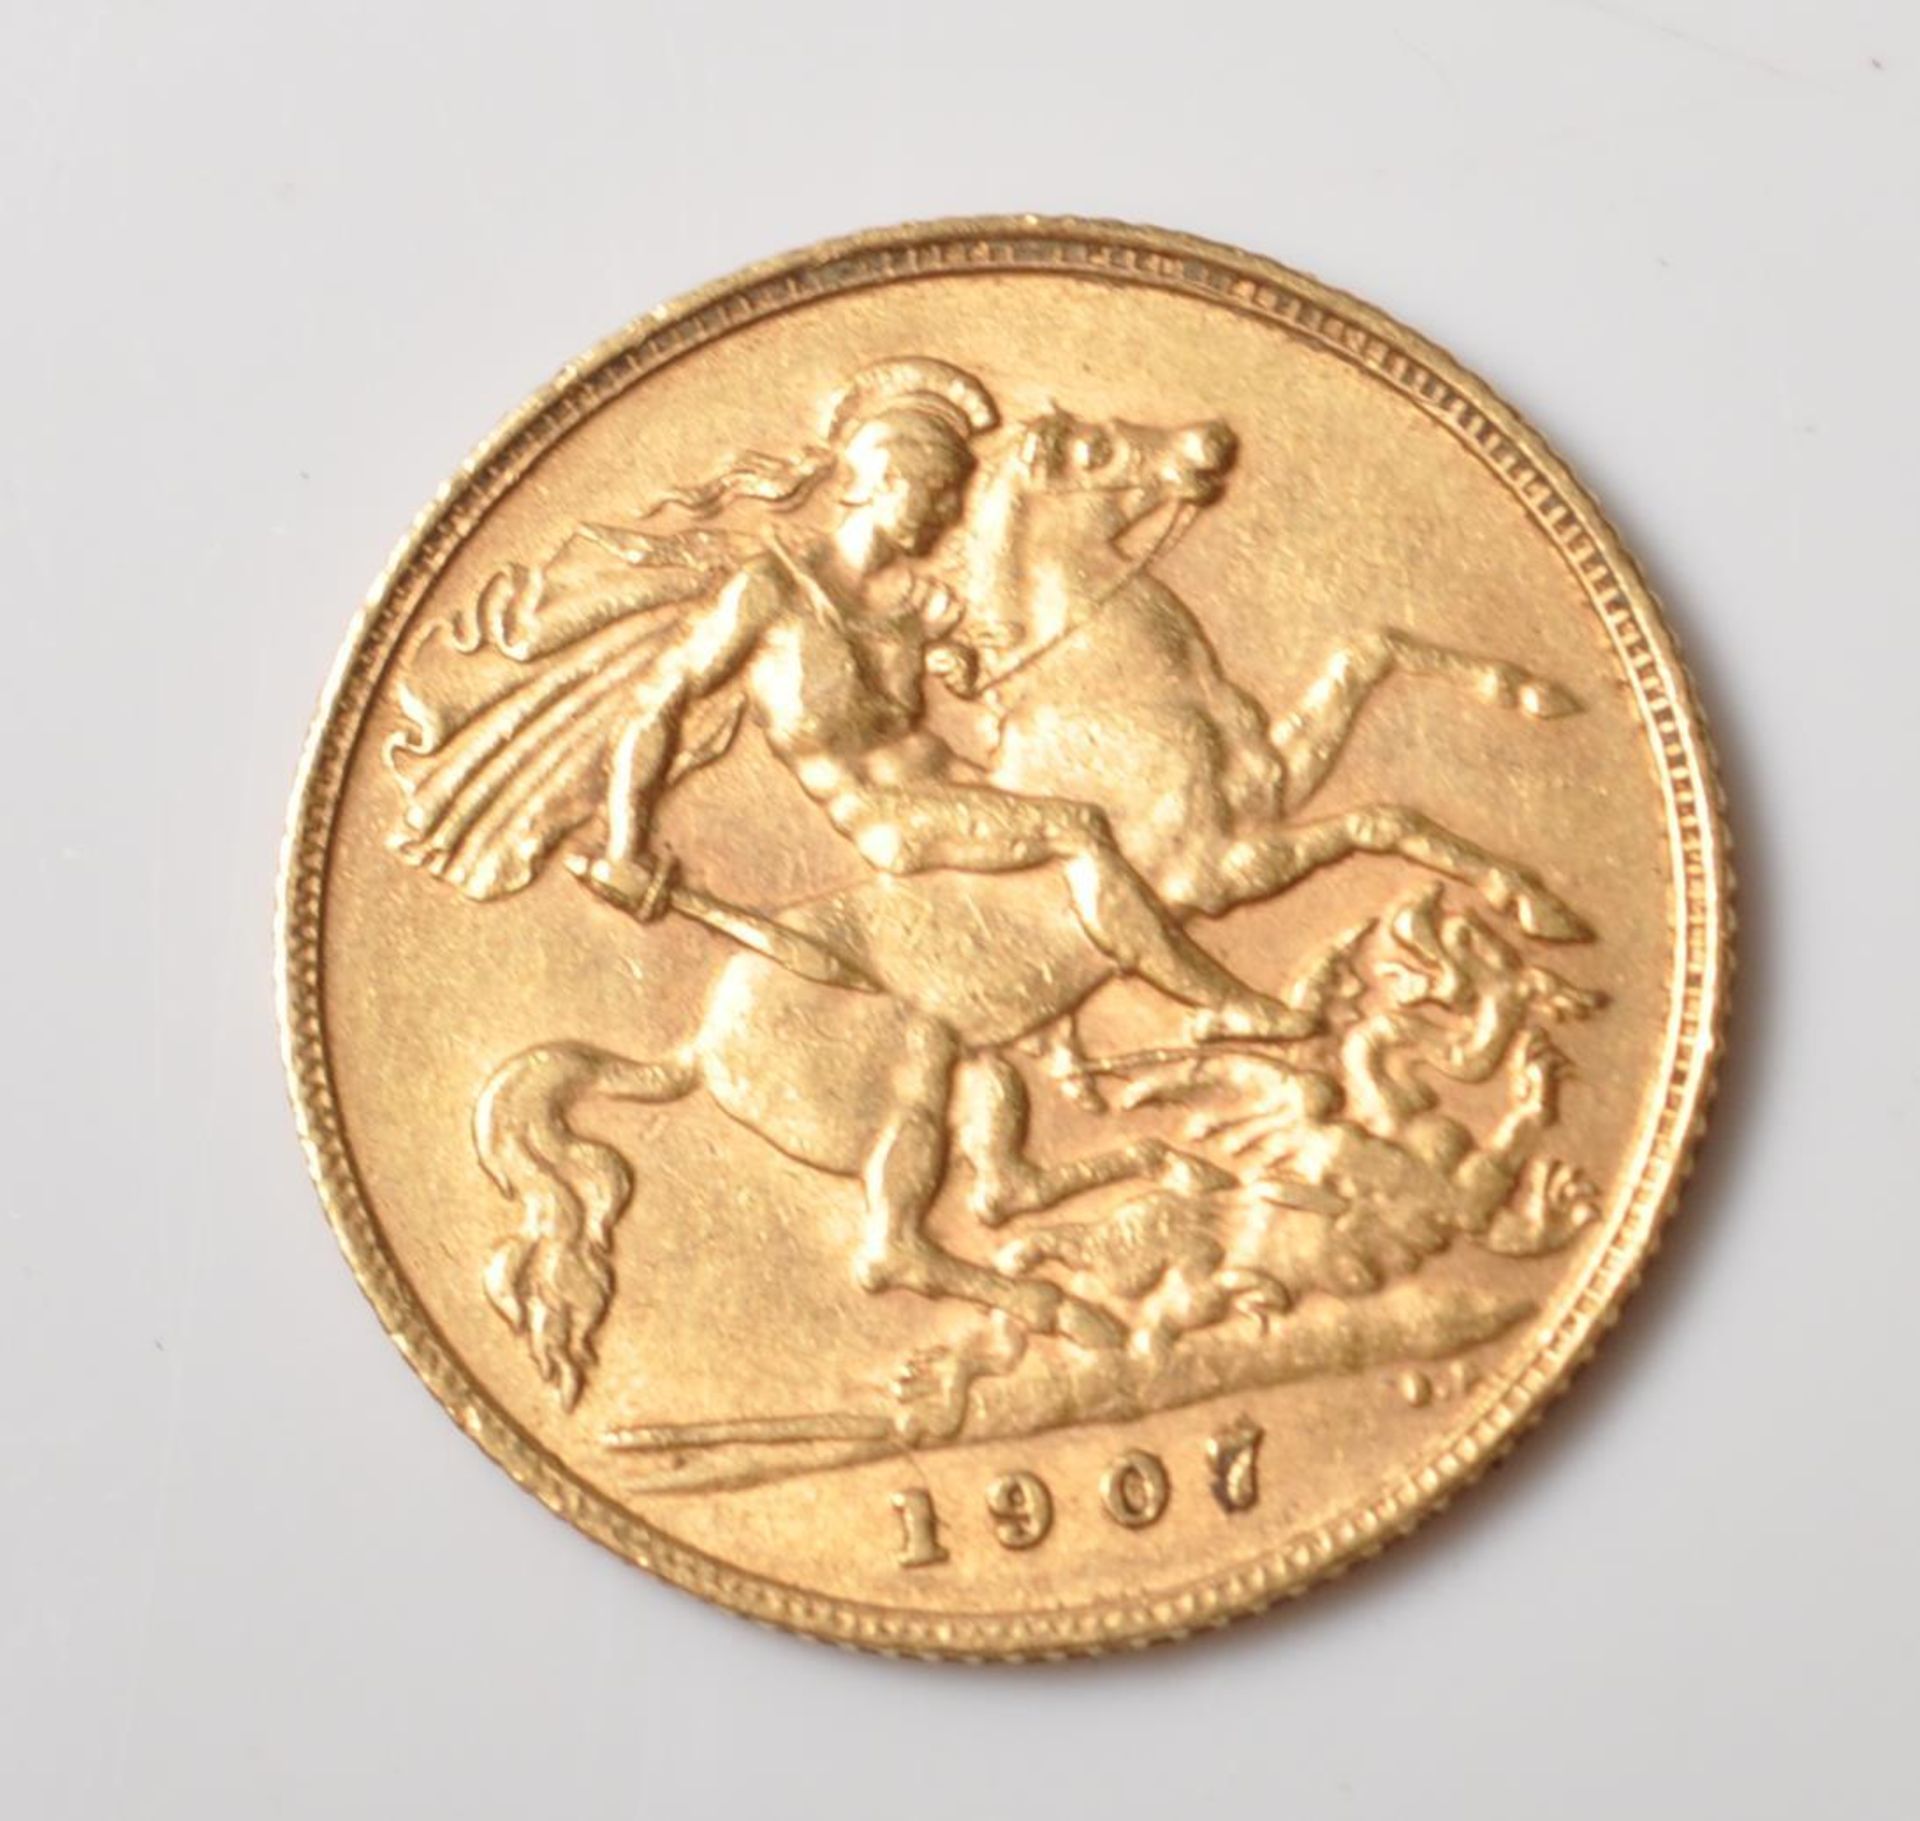 EDWARDIAN 1907 GOLD HALF SOVEREIGN COIN - Image 4 of 4